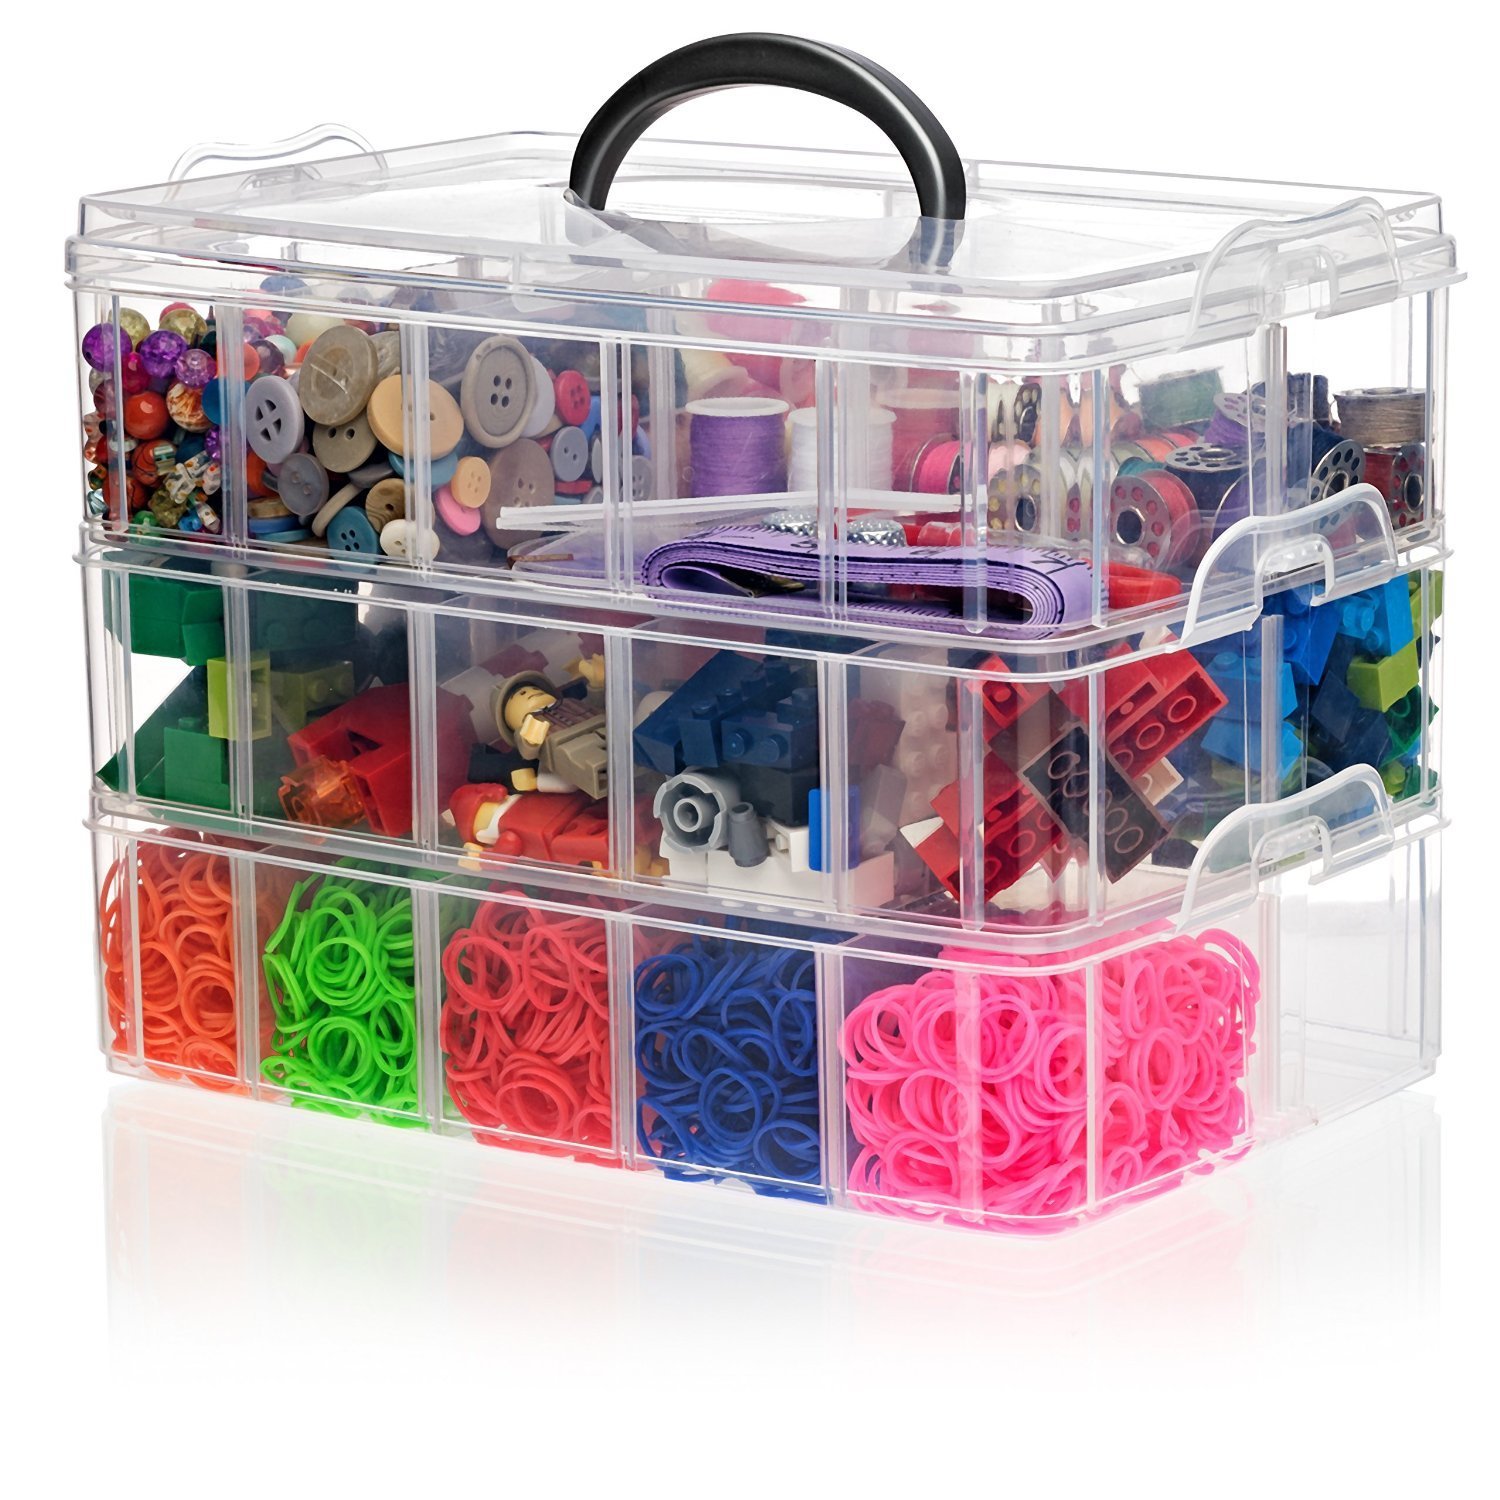 https://www.expertlychosen.com/images/2913-snapcube-stackable-arts-and-crafts-organizer.jpg